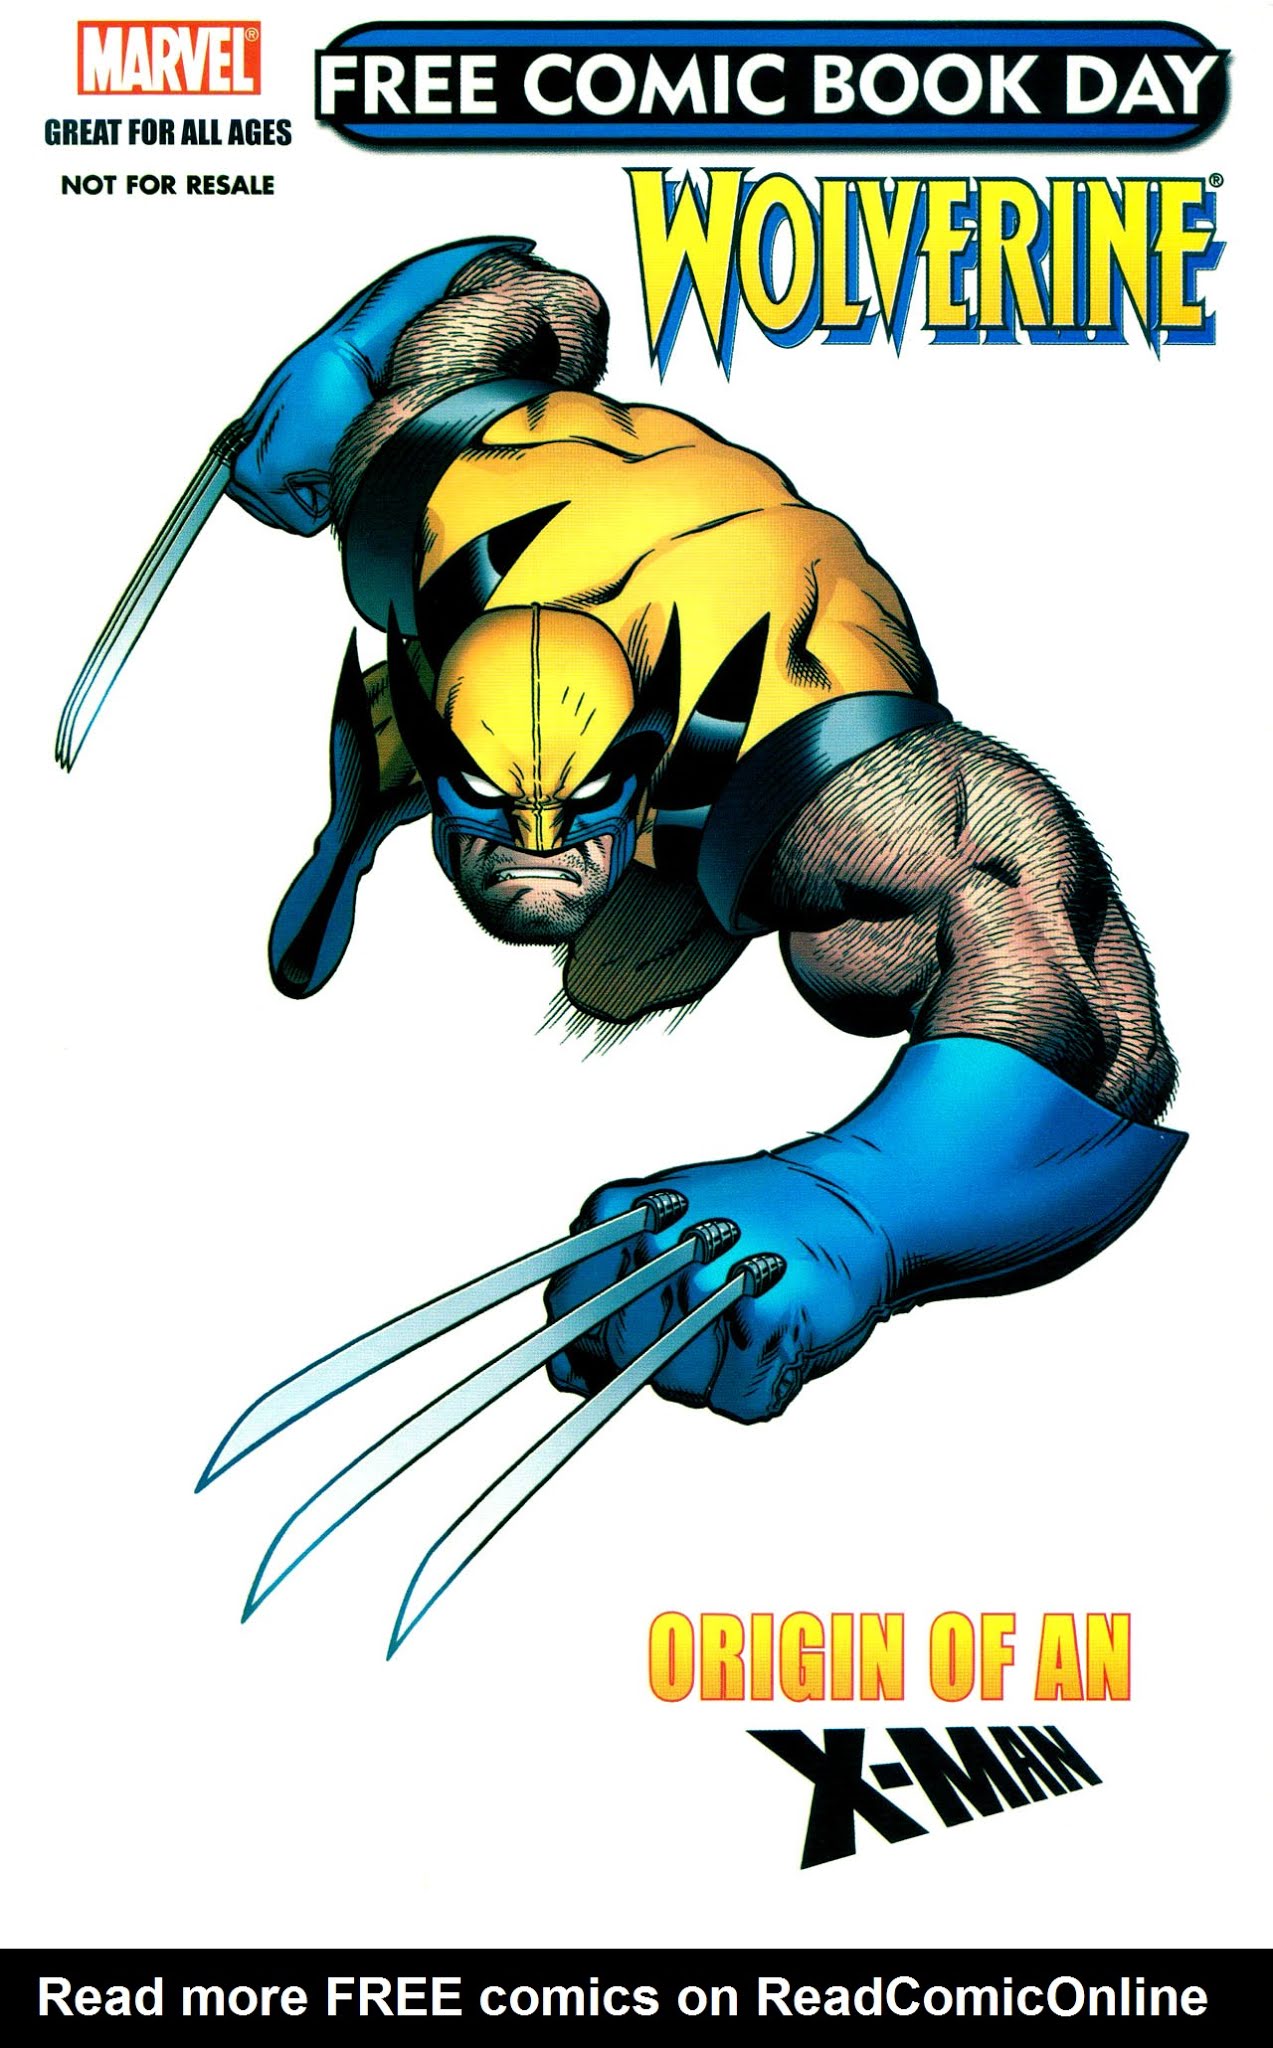 Read online Free Comic Book Day 2009 (Wolverine: Origin of an X-Man) comic -  Issue # Full - 1